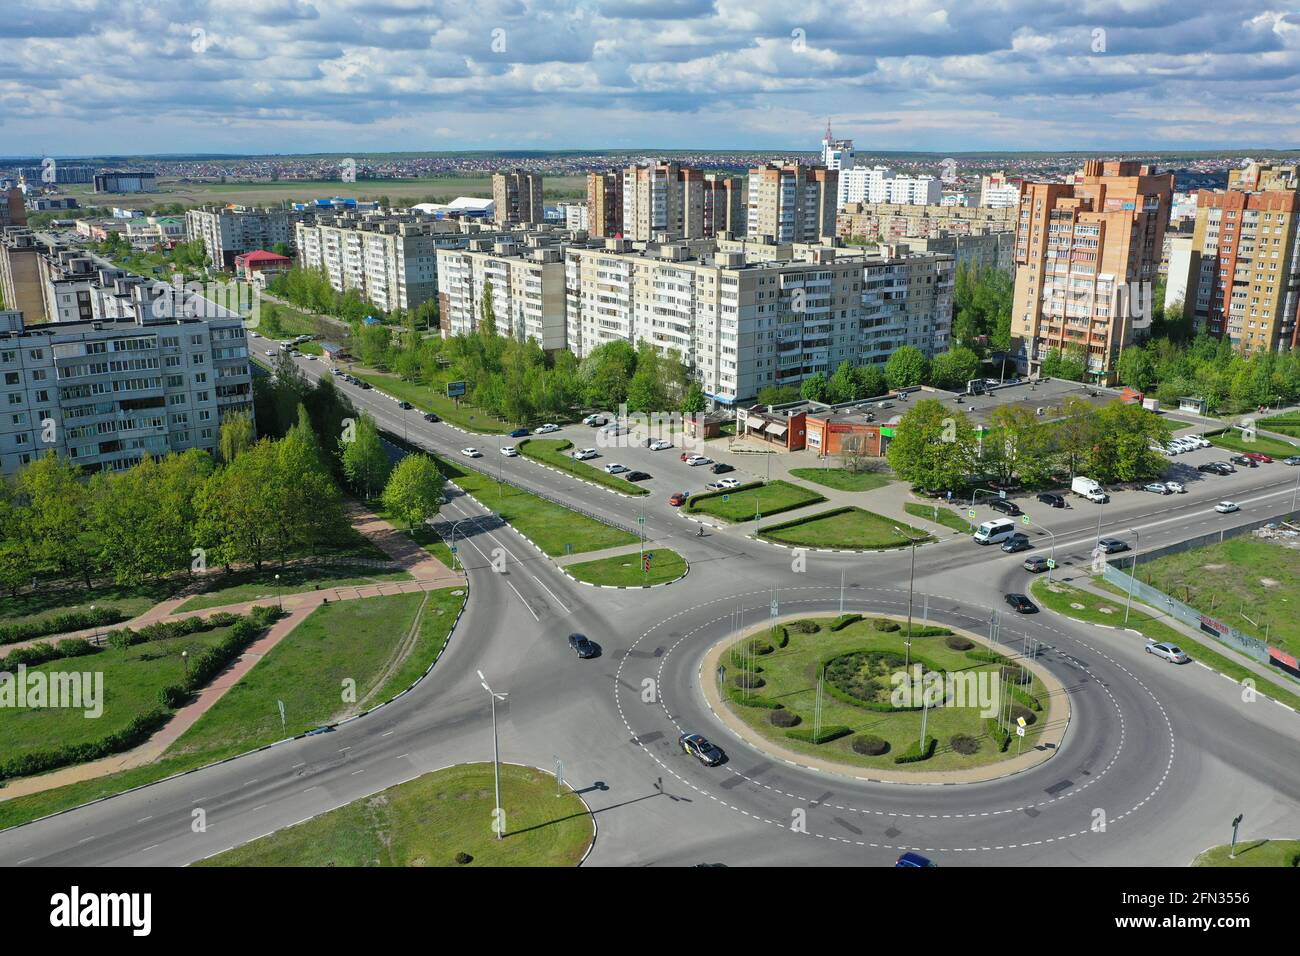 STARIY OSKOL, RUSSIA - MAY 12, 2021: Aerial view of the ring road and urban residential buildings Stock Photo